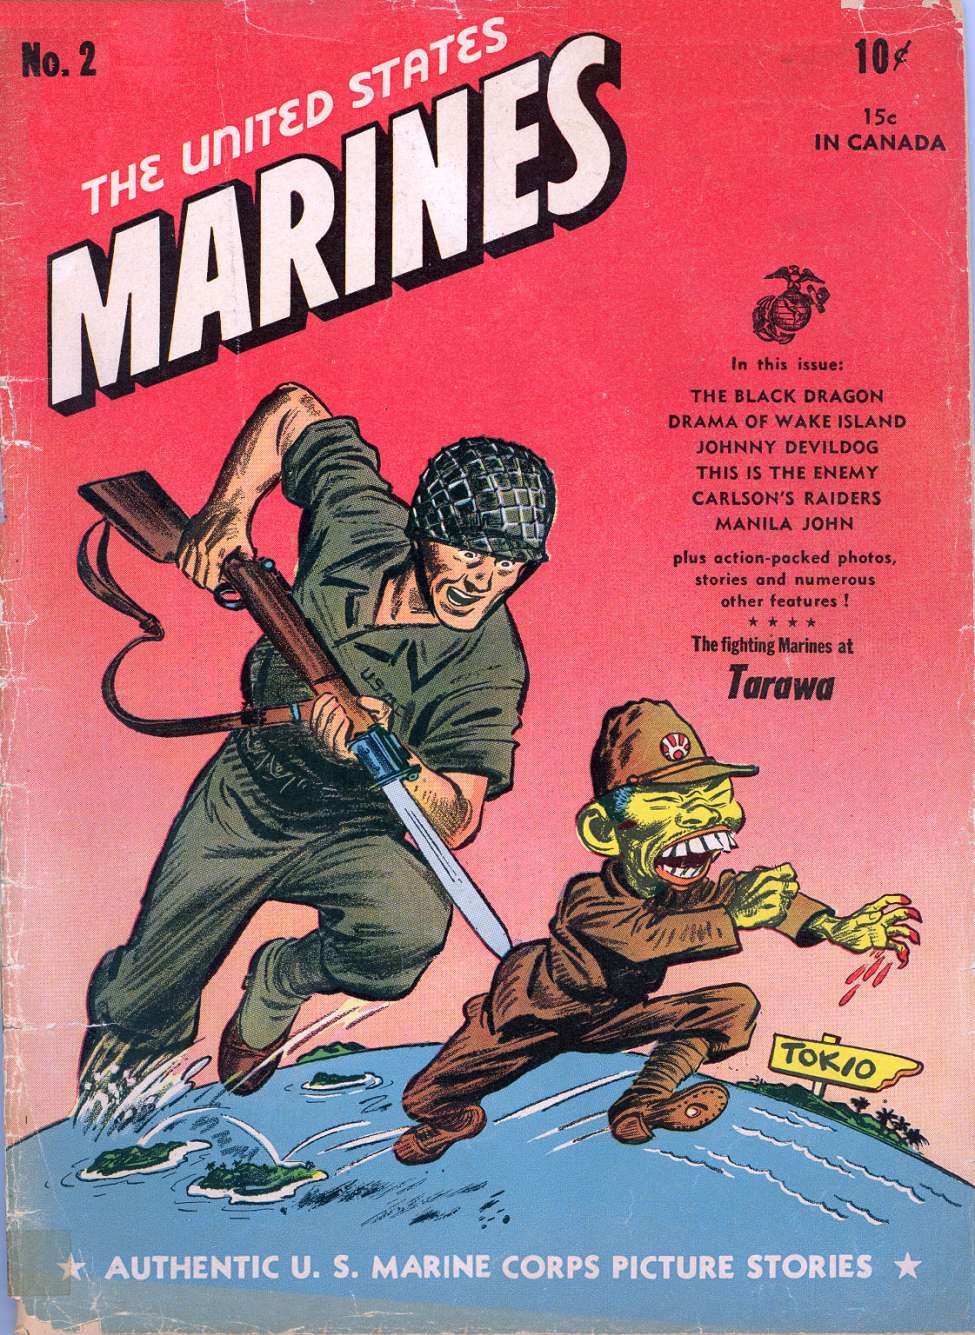 Book Cover For The United States Marines 2